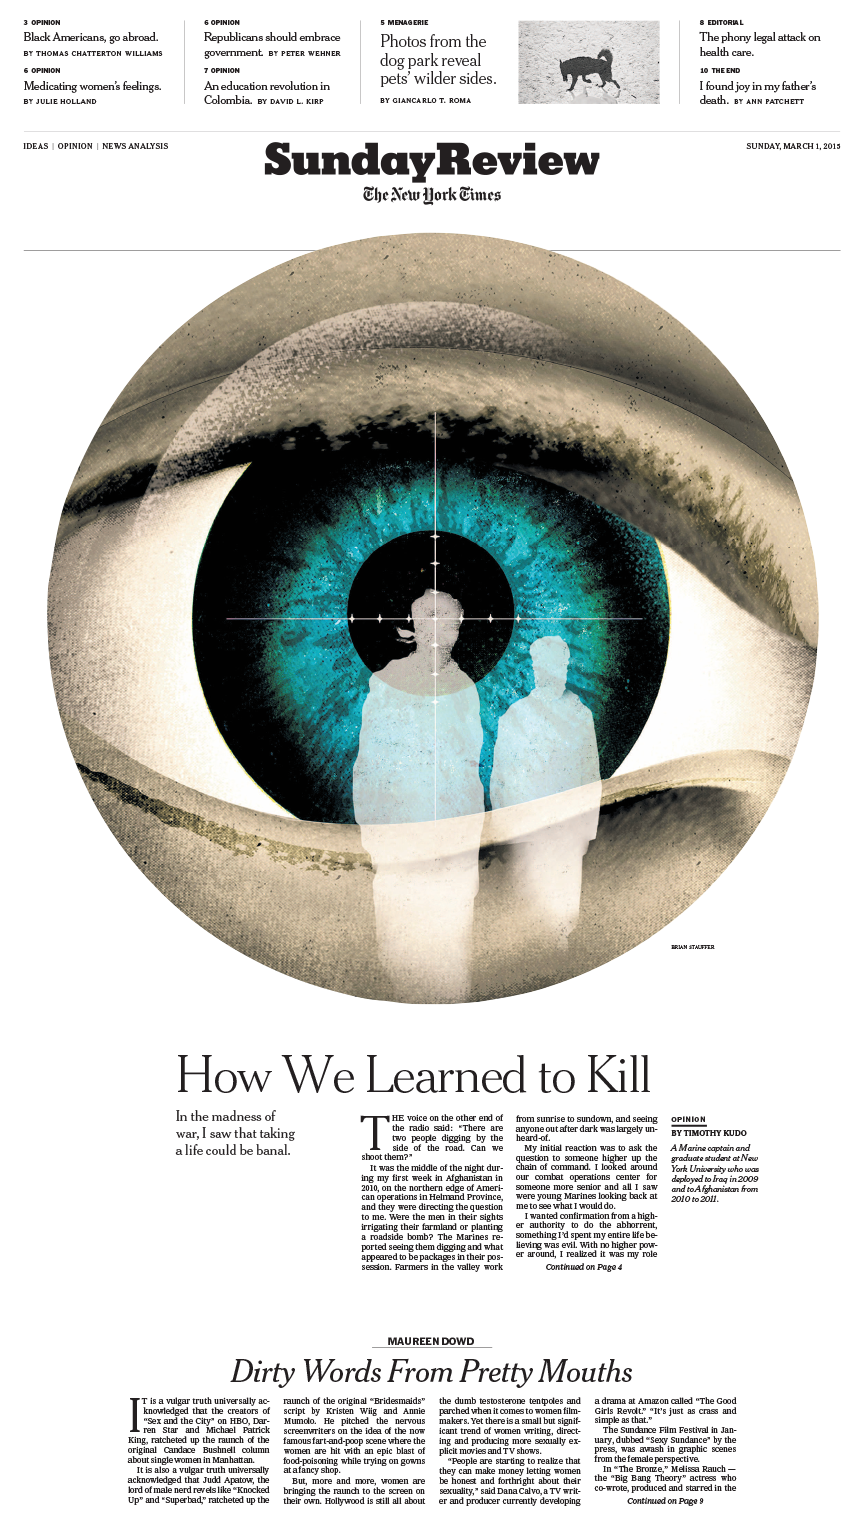 Sunday Review Cover: How We Learned To Kill